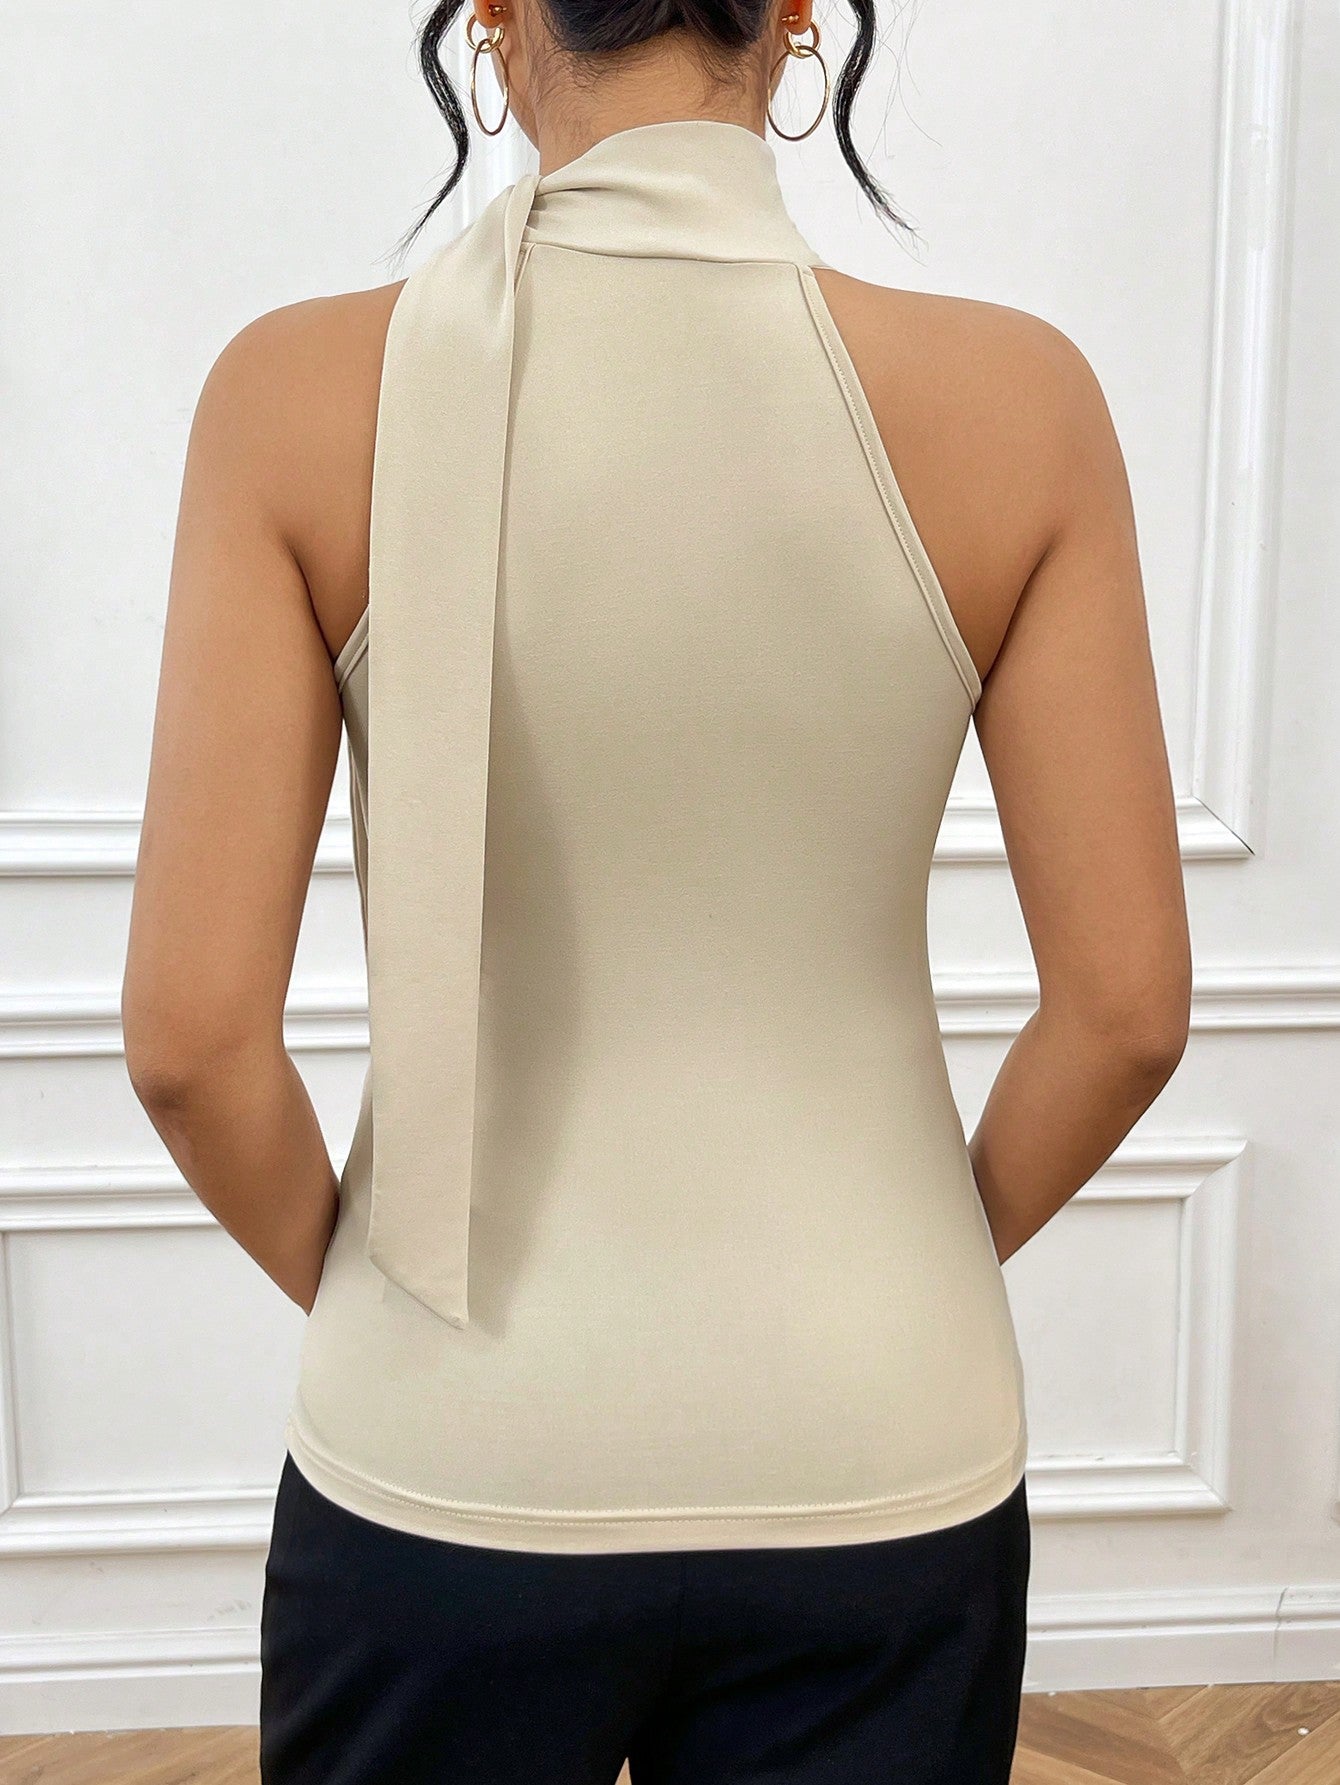 Solid Color Knotted Neck Sleeveless Top, Suitable For Festival, Commute, Vacation